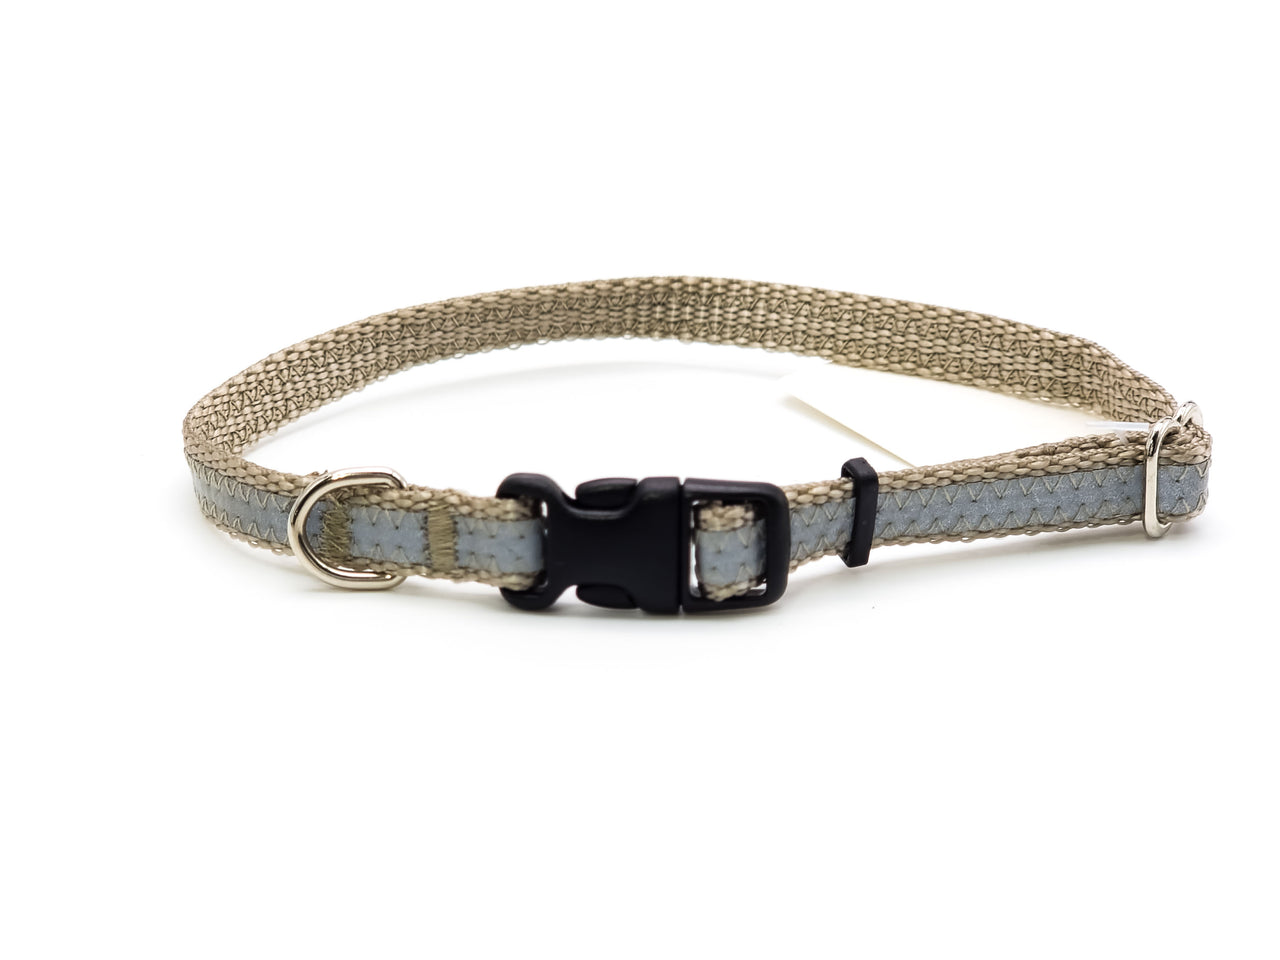 Reflective Pewter | Flat Side Release Collar | Small / Medium 9"-15" in 3/8" wide